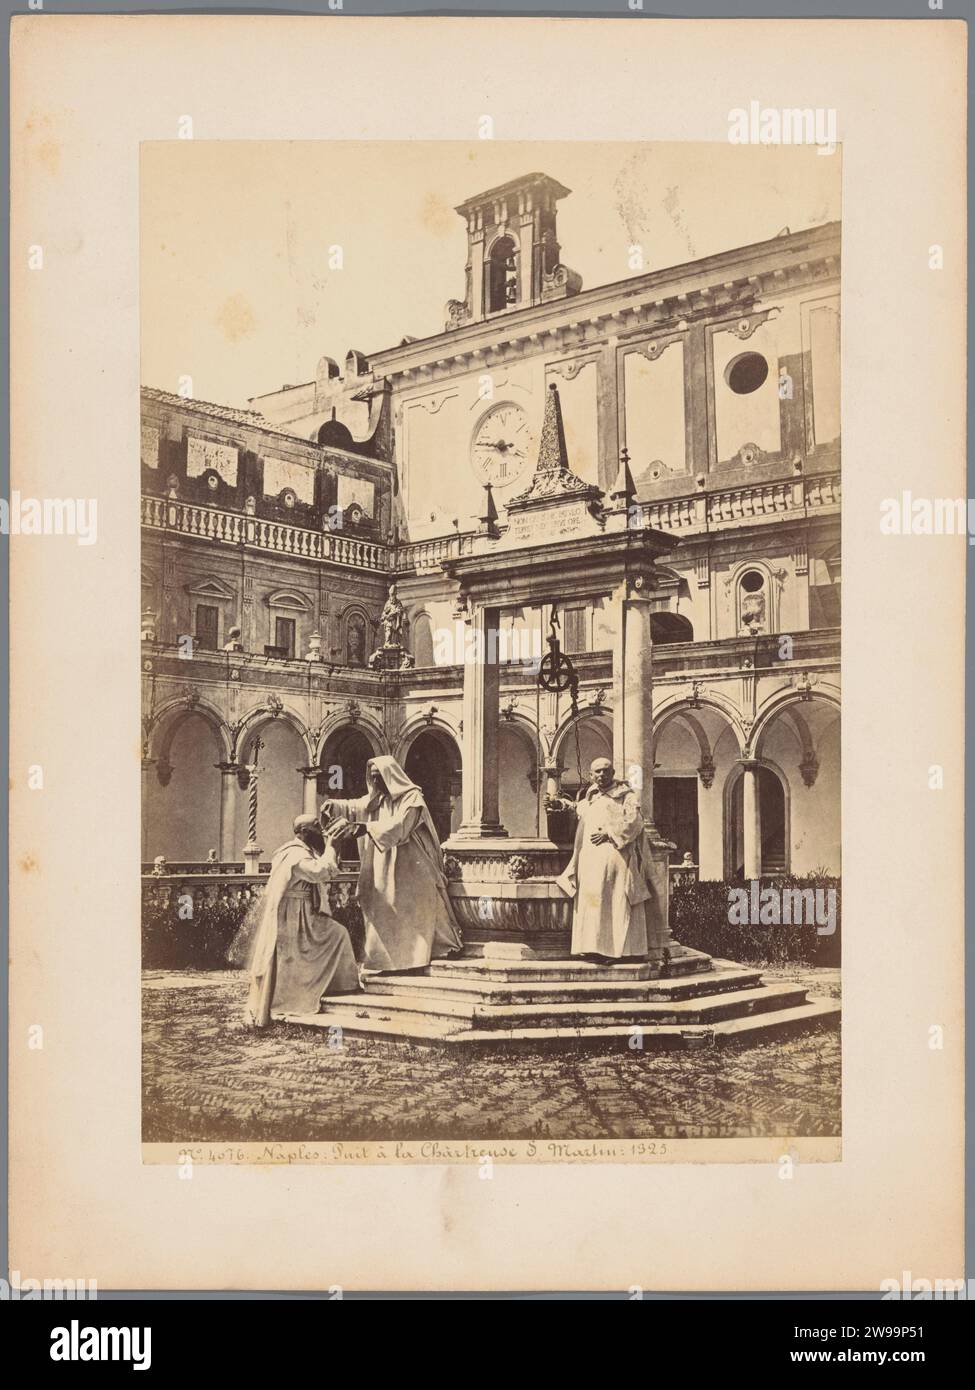 Water well in the Carthusian monastery of San Martino in Naples, with monks drinking in the foreground, c. 1875 - c. 1900 photograph  Kartuizerklooster San Martino cardboard. photographic support albumen print well. cloisters  monastery. exterior  representation of a building. monk(s), friar(s) Kartuizerklooster San Martino Stock Photo